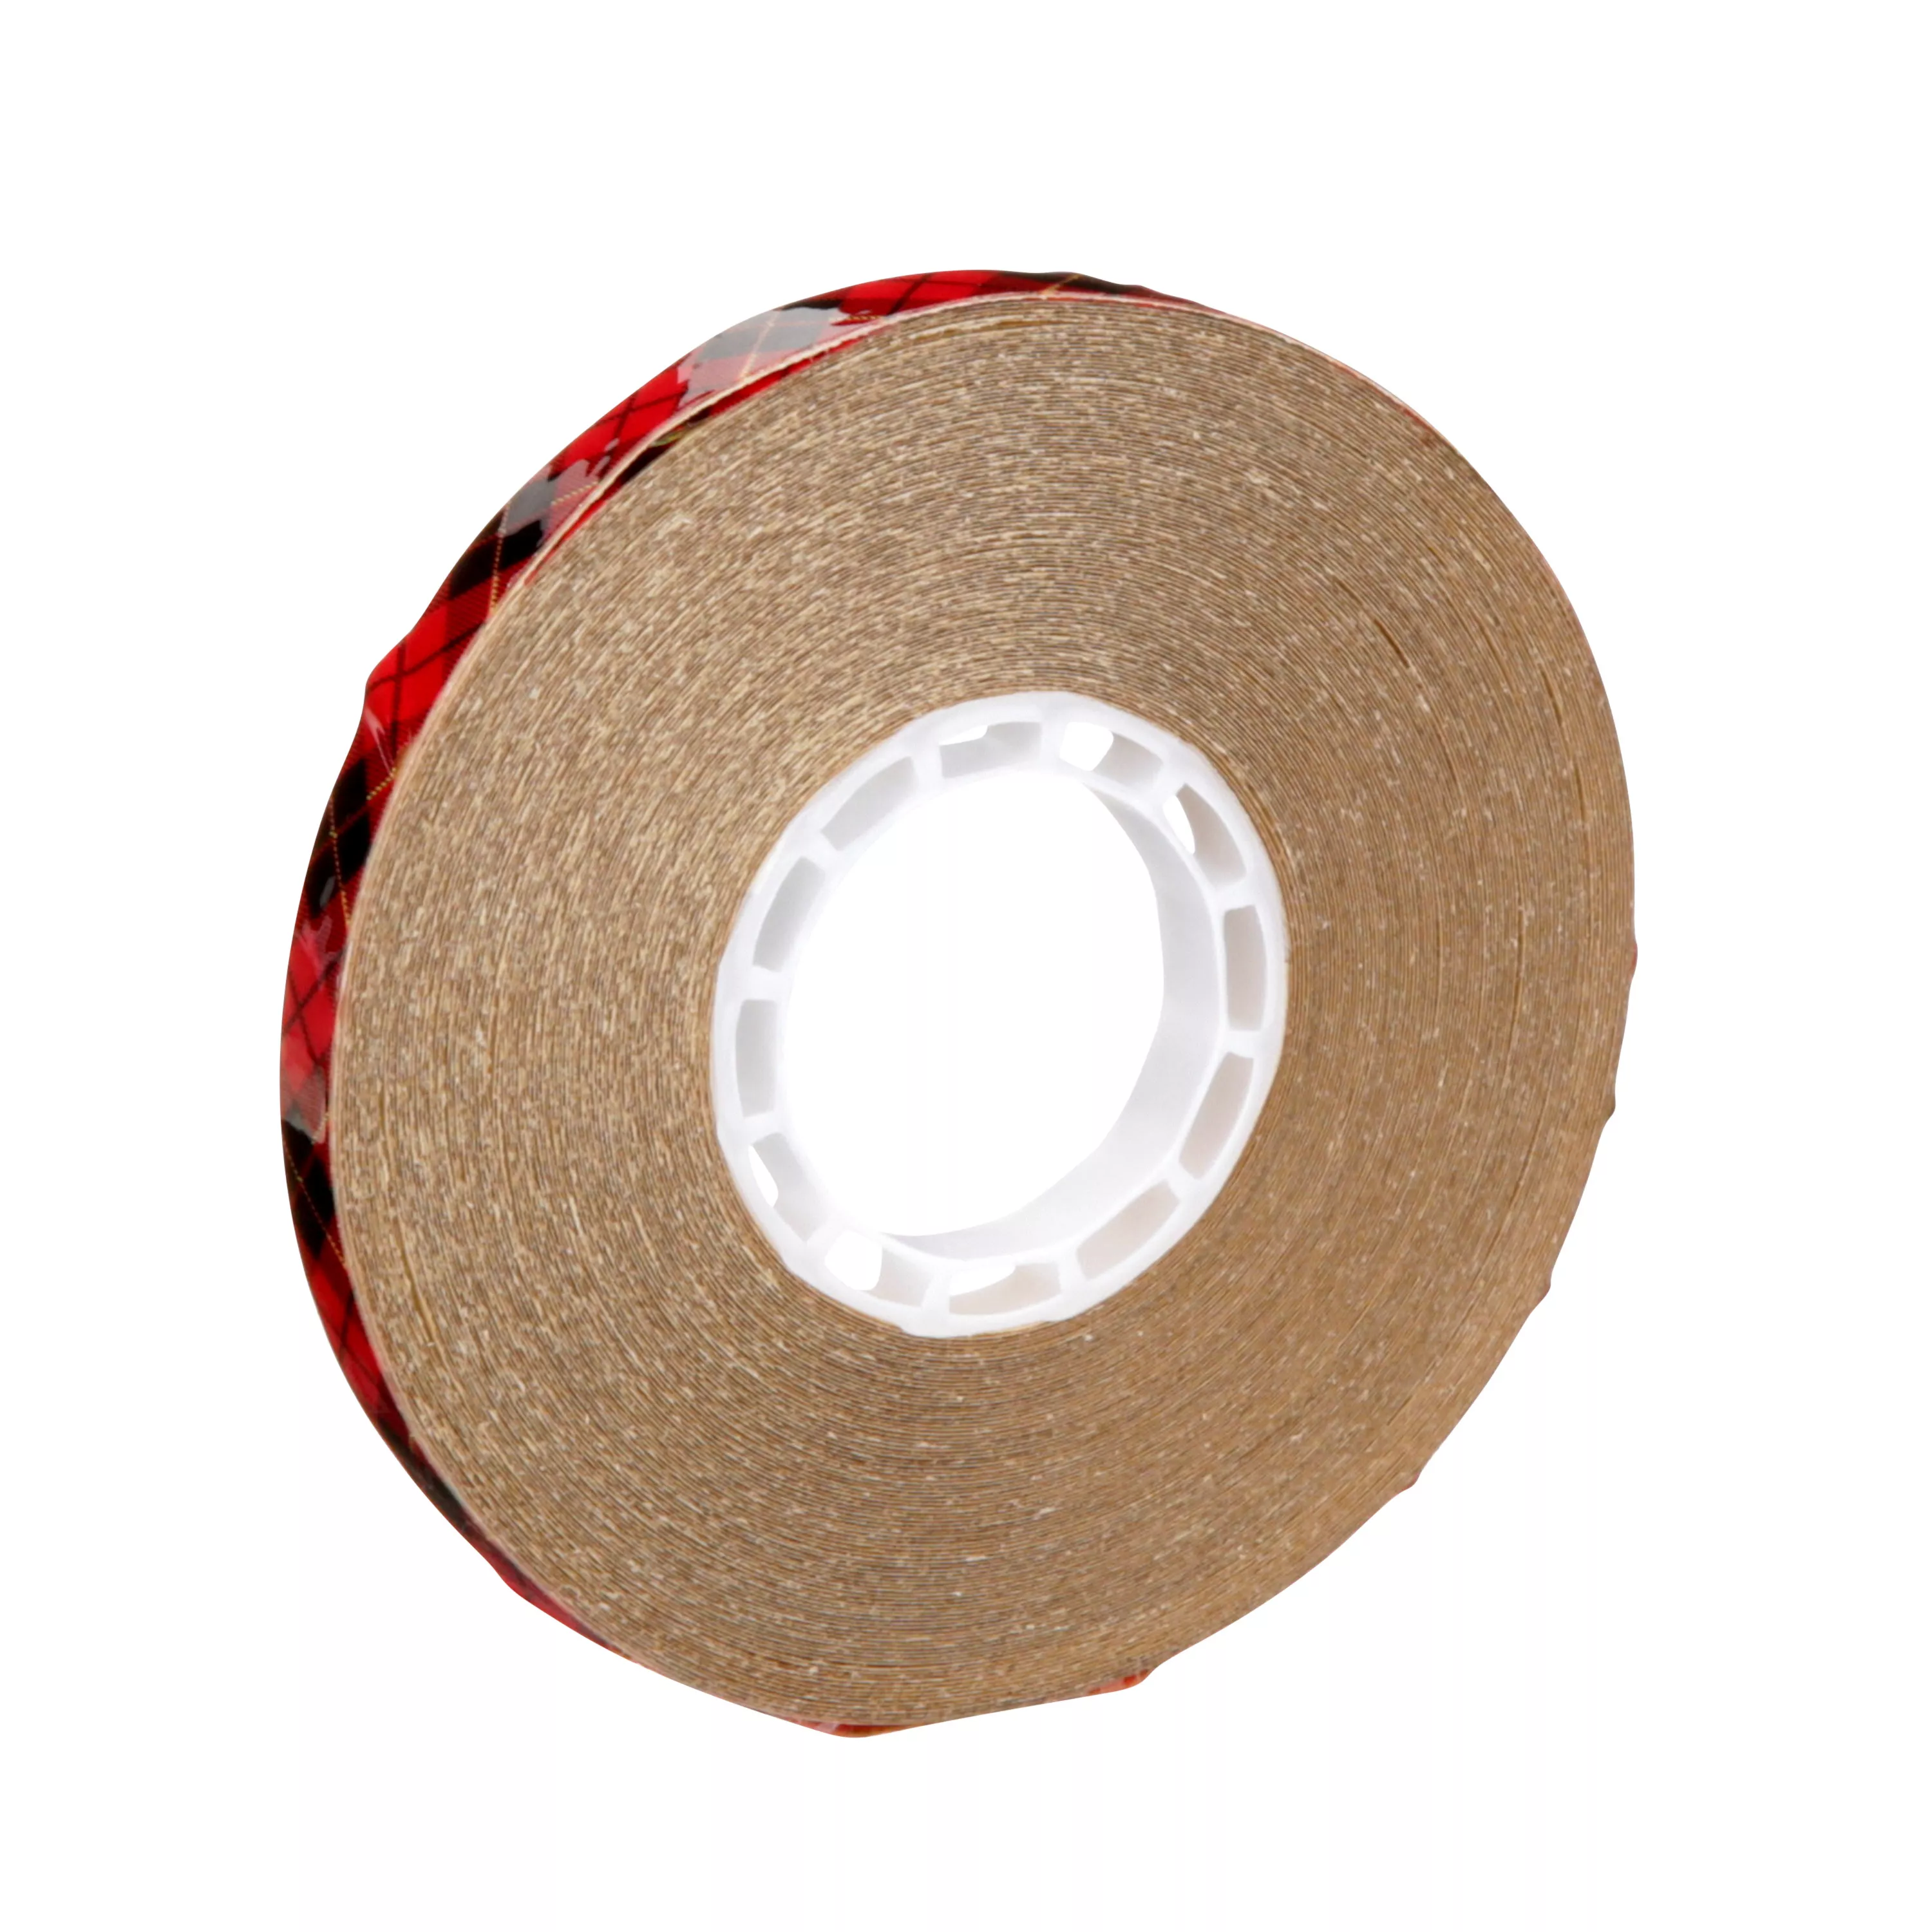 Scotch® ATG Adhesive Transfer Tape 926, Clear, 1/4 in x 18 yd, 5 mil,
(12 Roll/Carton) 72 Roll/Case